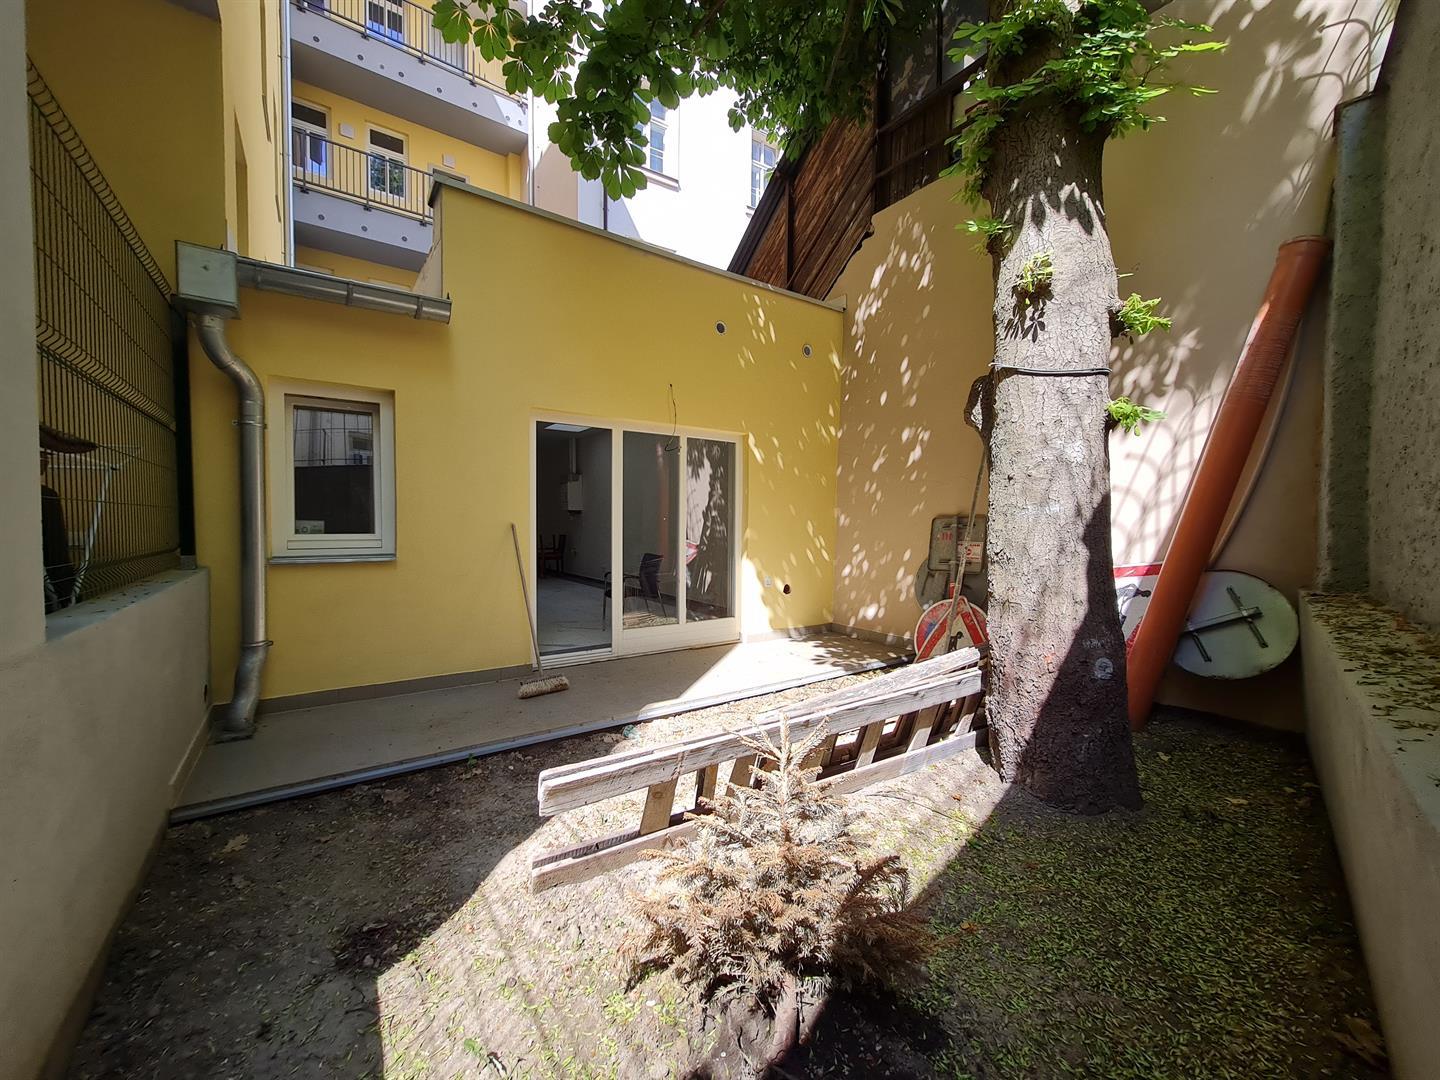 Sale of non-residential space 74 m2 on the ground floor with access to the garden in Prague 5